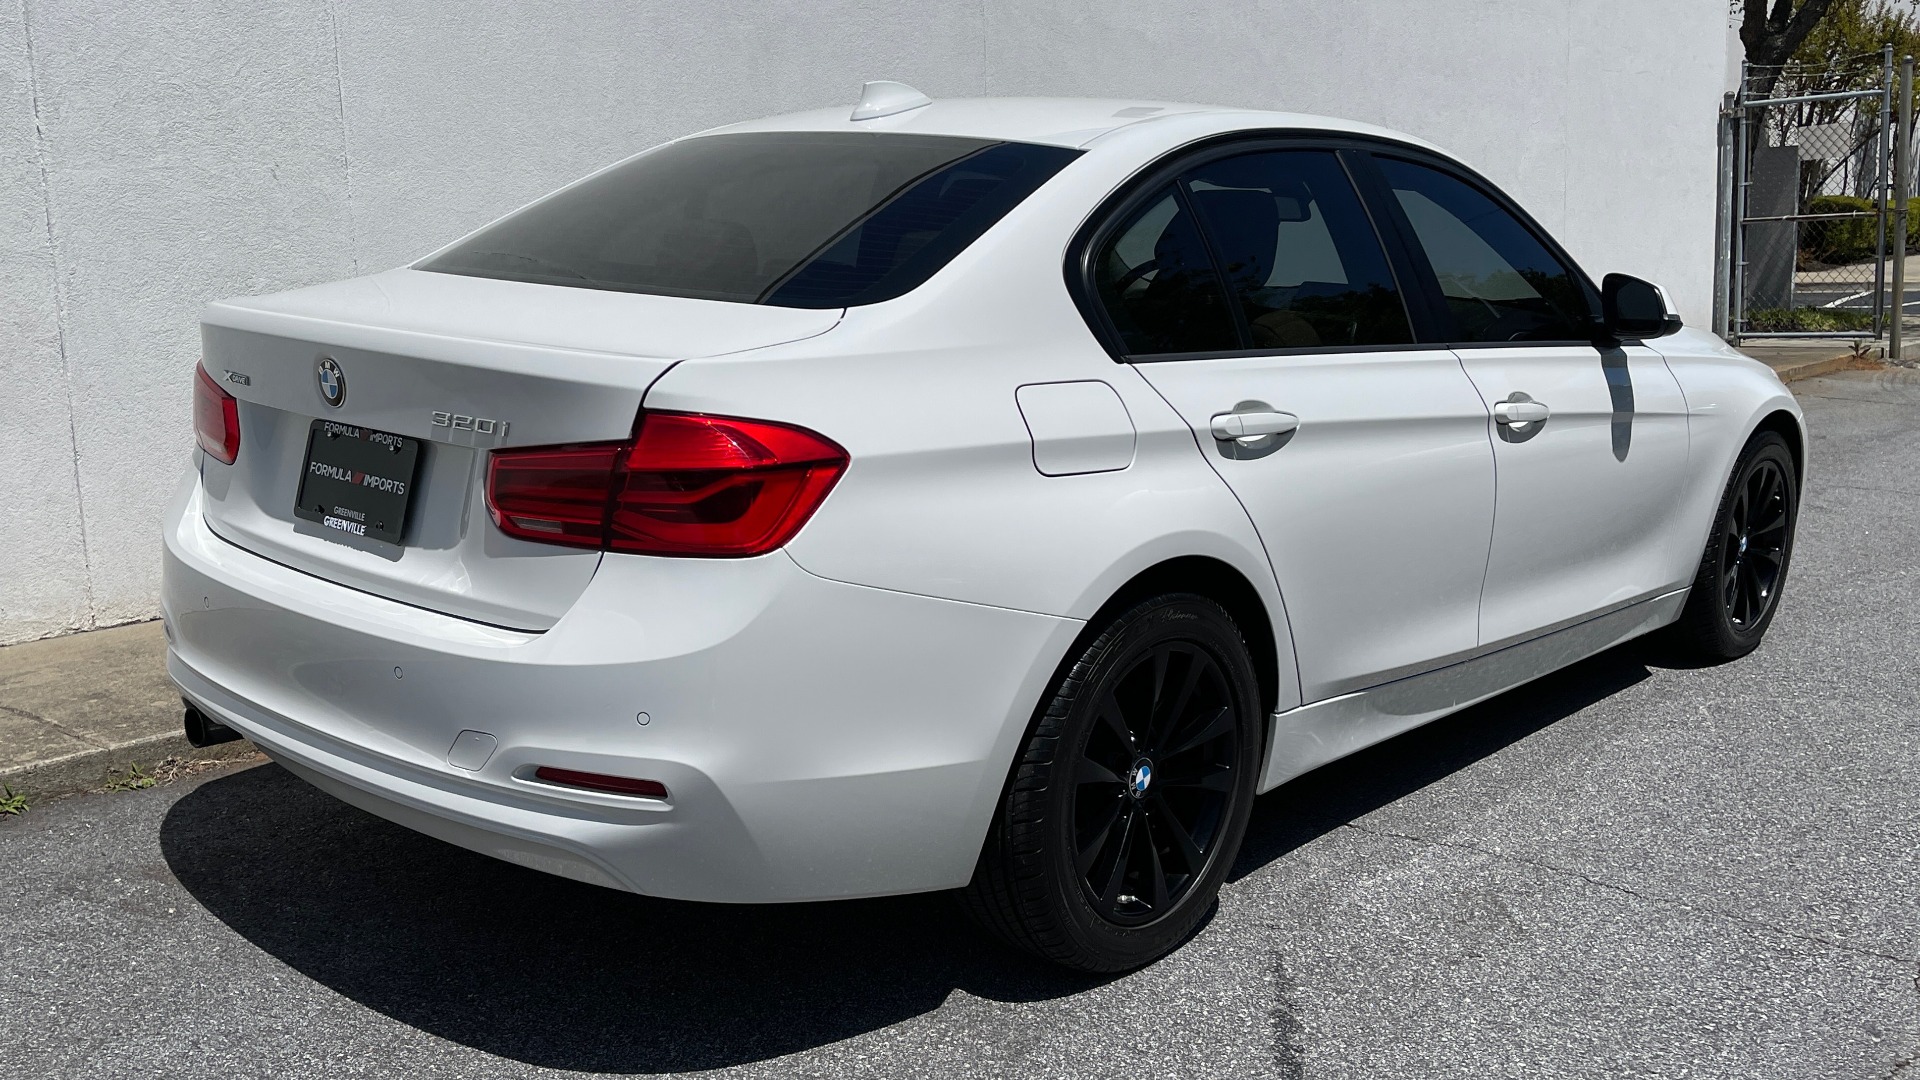 Used 2017 BMW 3 SERIES 320I XDRIVE SEDAN / DRVR ASST / SUNROOF / HTD STS / REARVIEW for sale $25,295 at Formula Imports in Charlotte NC 28227 2